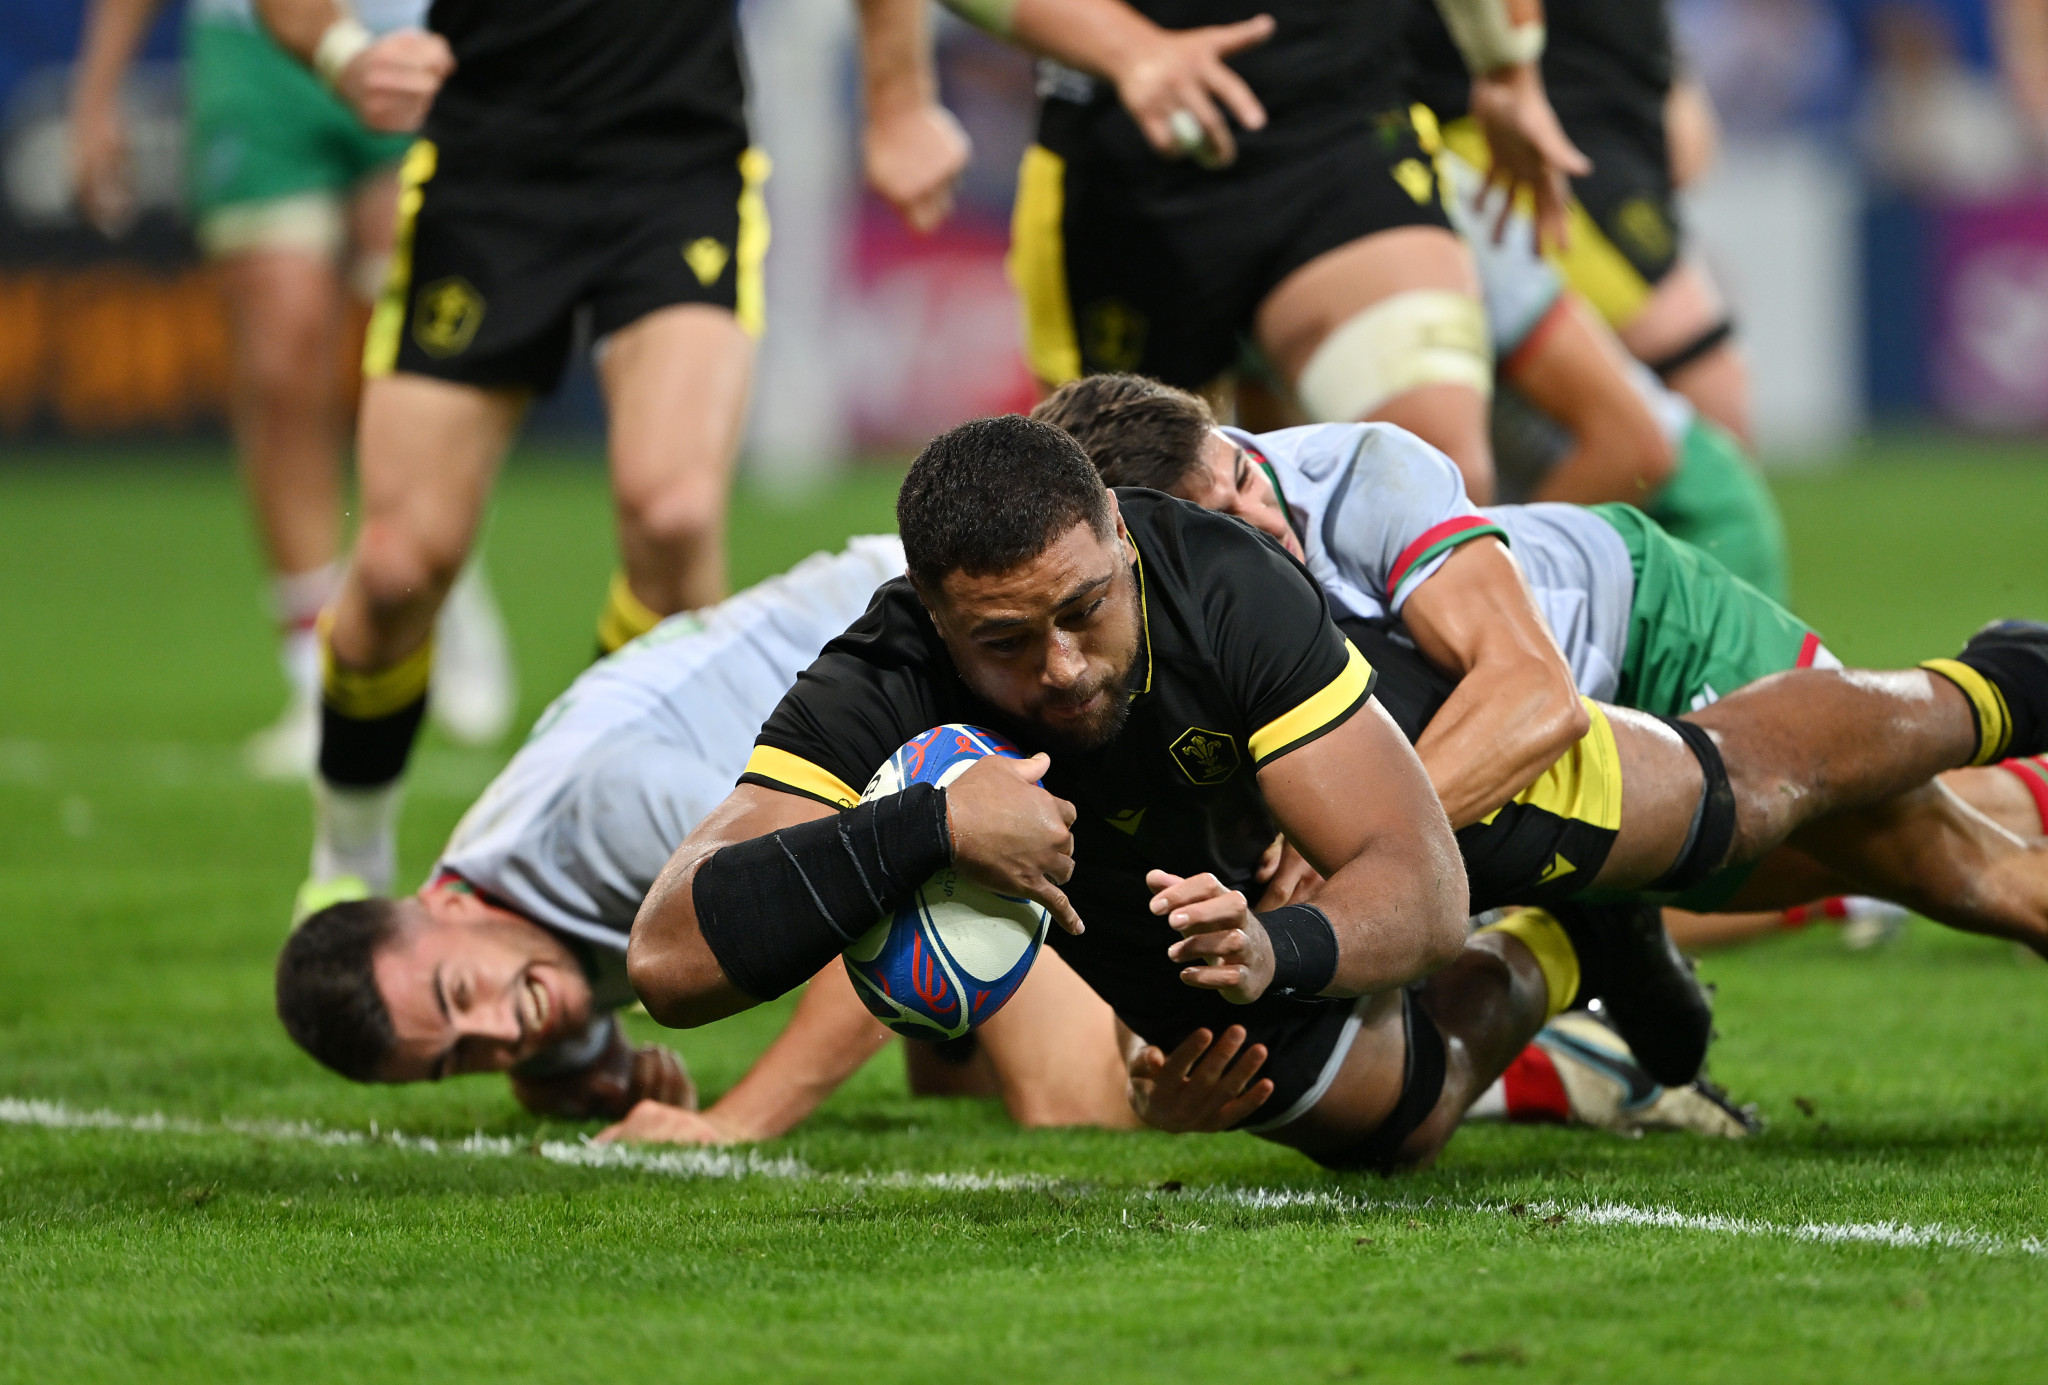 Taulupe Faletau scored the fourth try for Wales today ©Getty Images